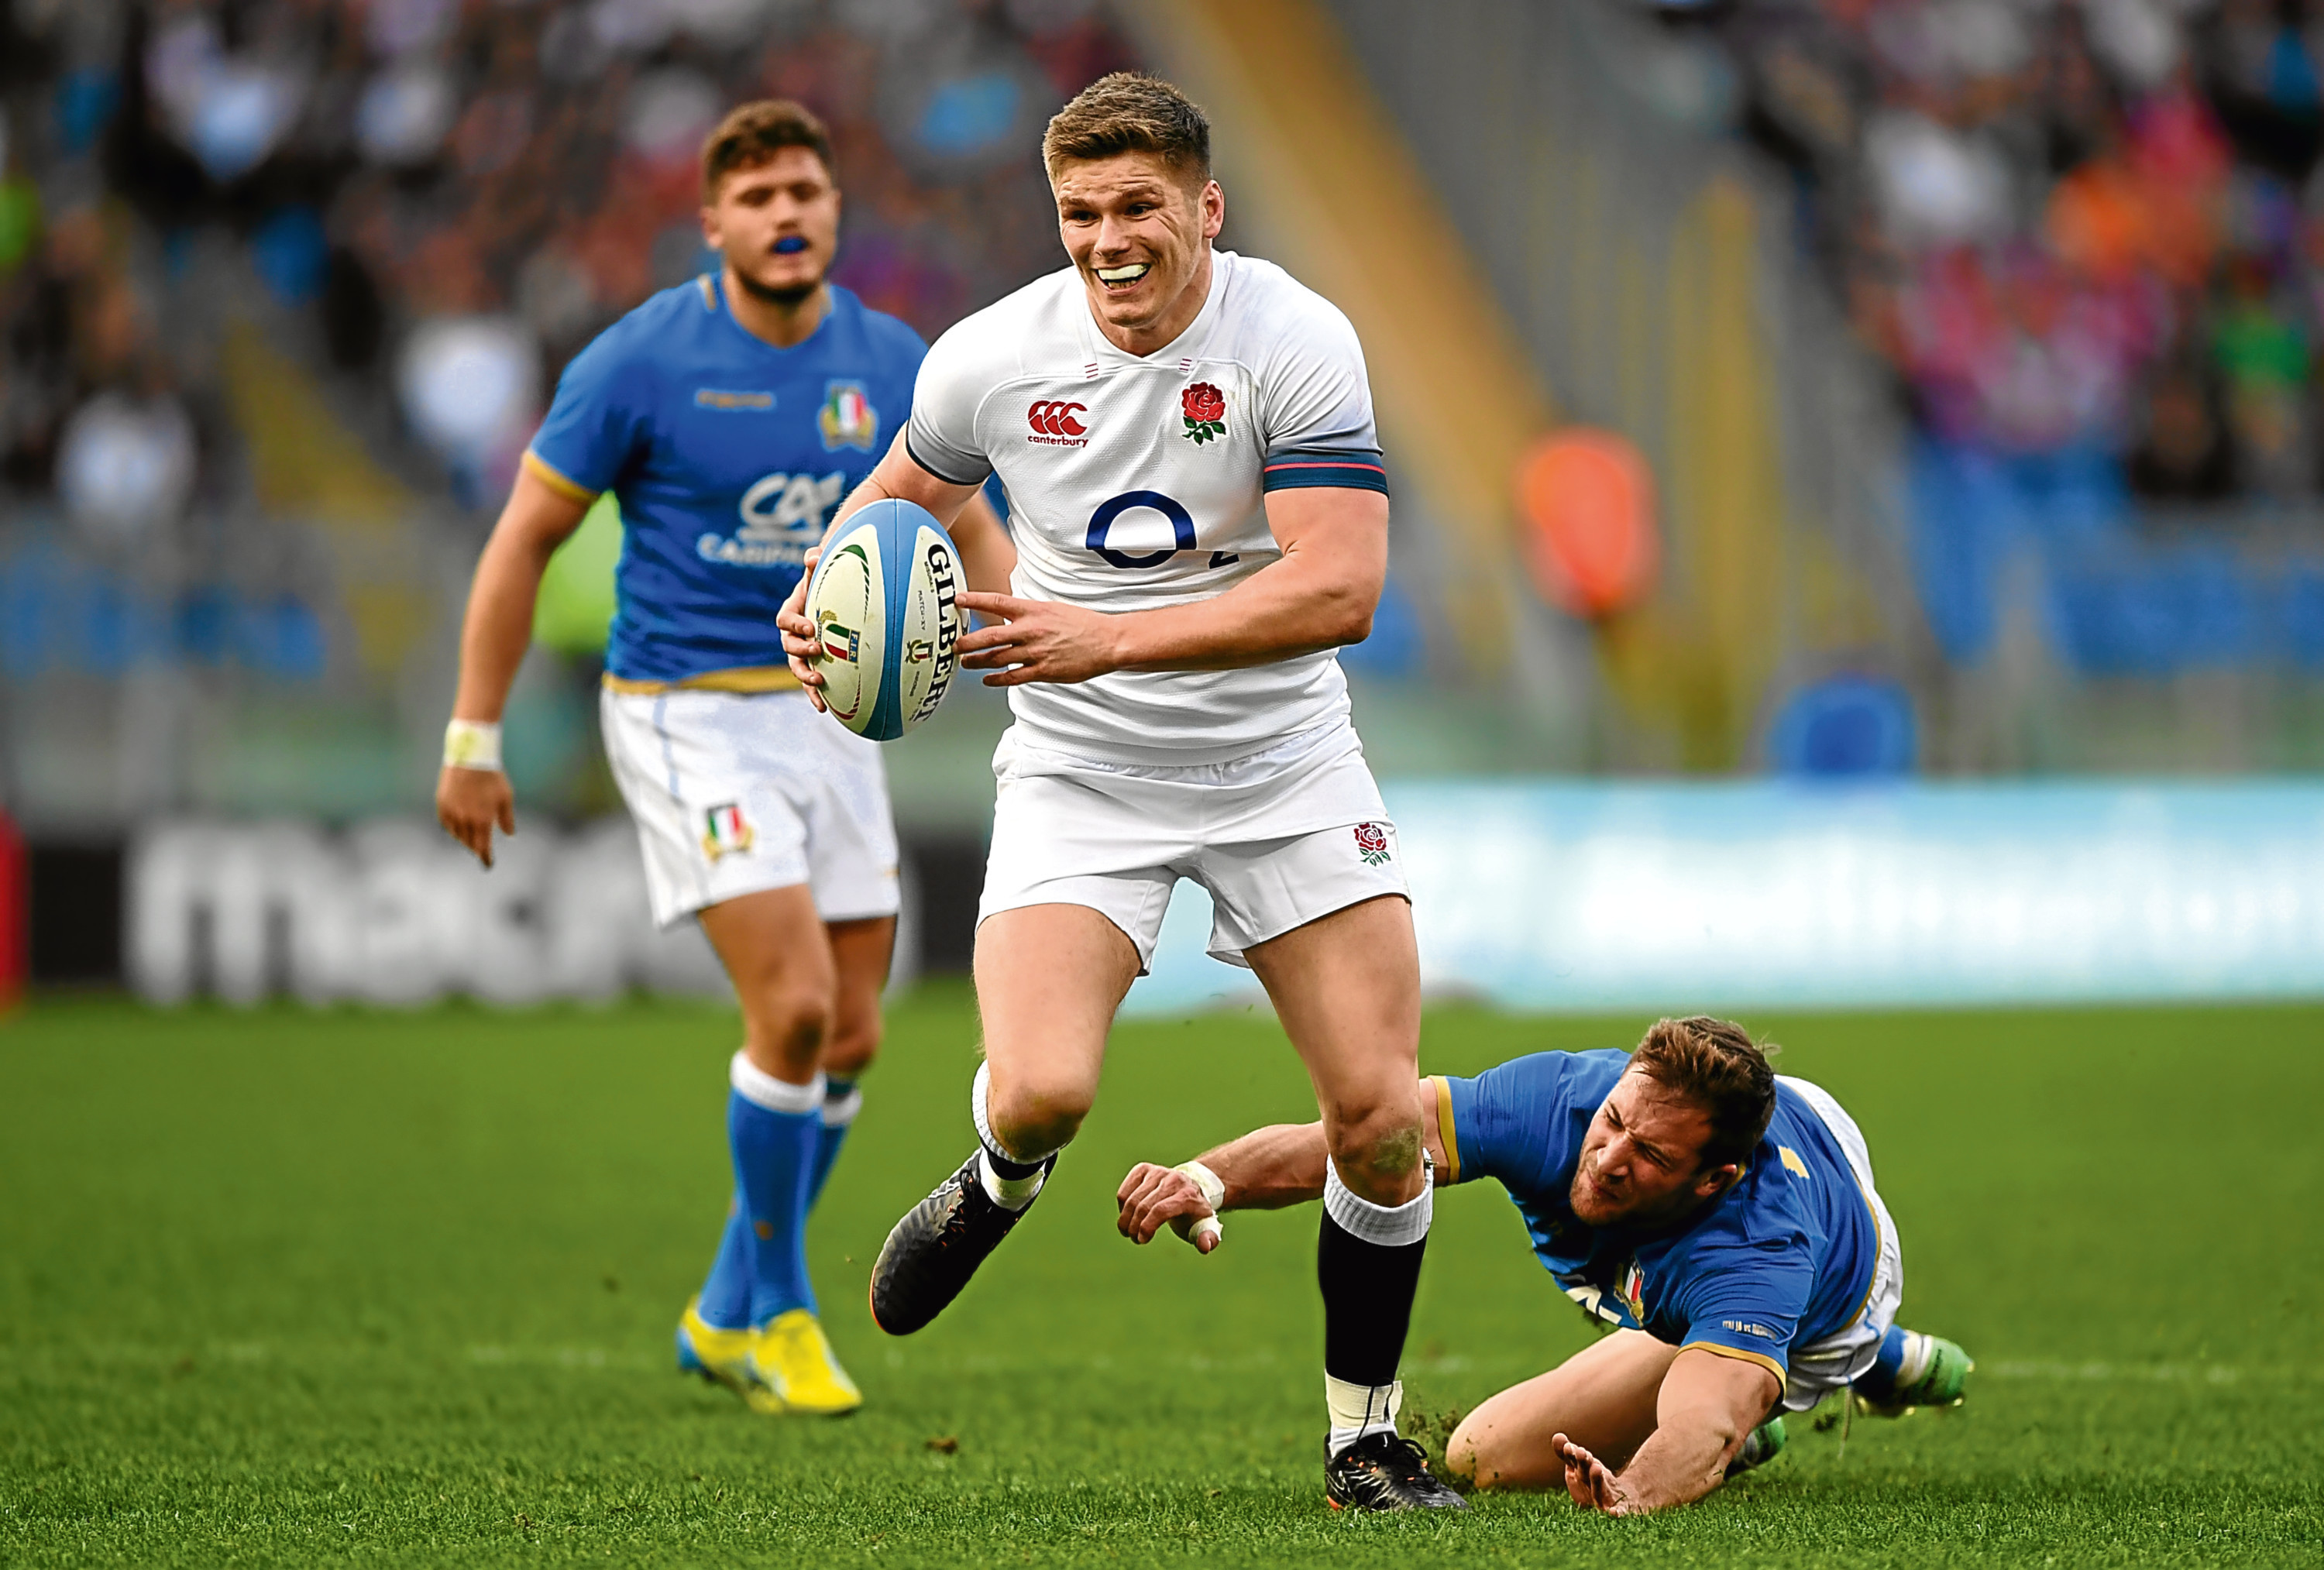 ROME, ITALY - FEBRUARY 04:  Owen Farrell of England breaks through and goes on to score his sides third try during the NatWest Six Nations round One match between Italy and Engalnd at Stadio Olimpico on February 4, 2018 in Rome, Italy.  (Photo by Shaun Botterill/Getty Images)